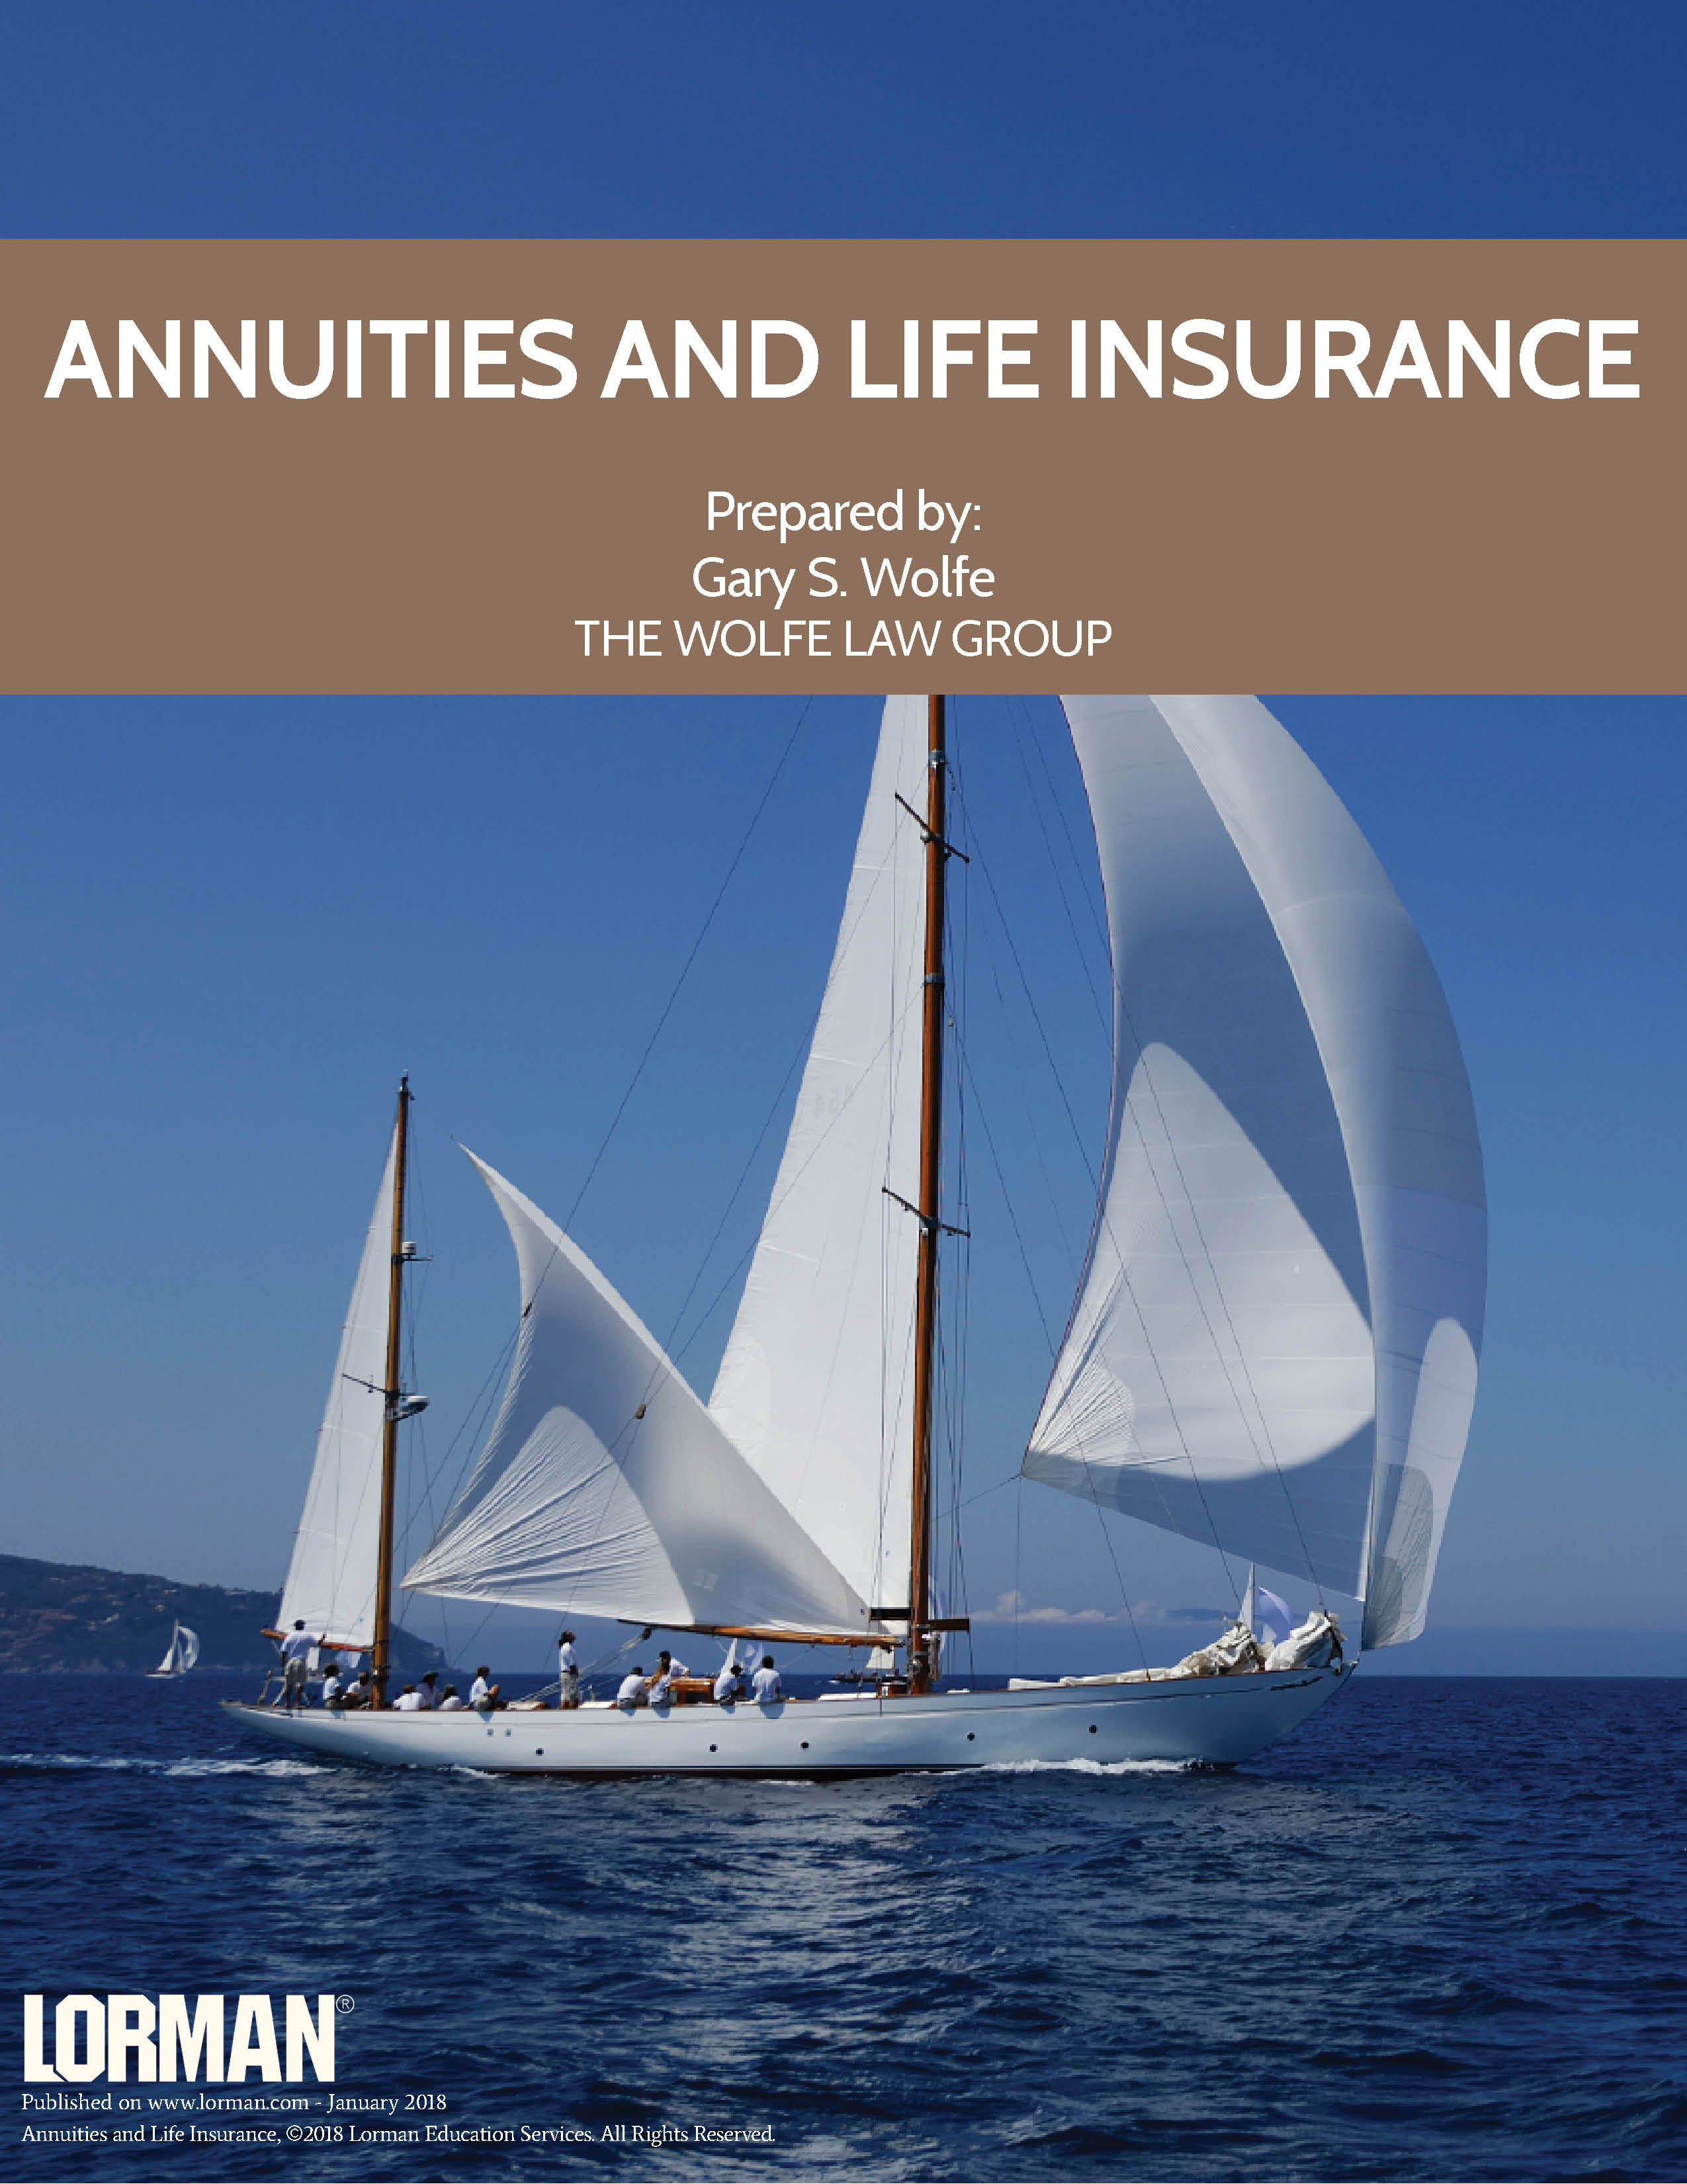 Annuities and Life Insurance